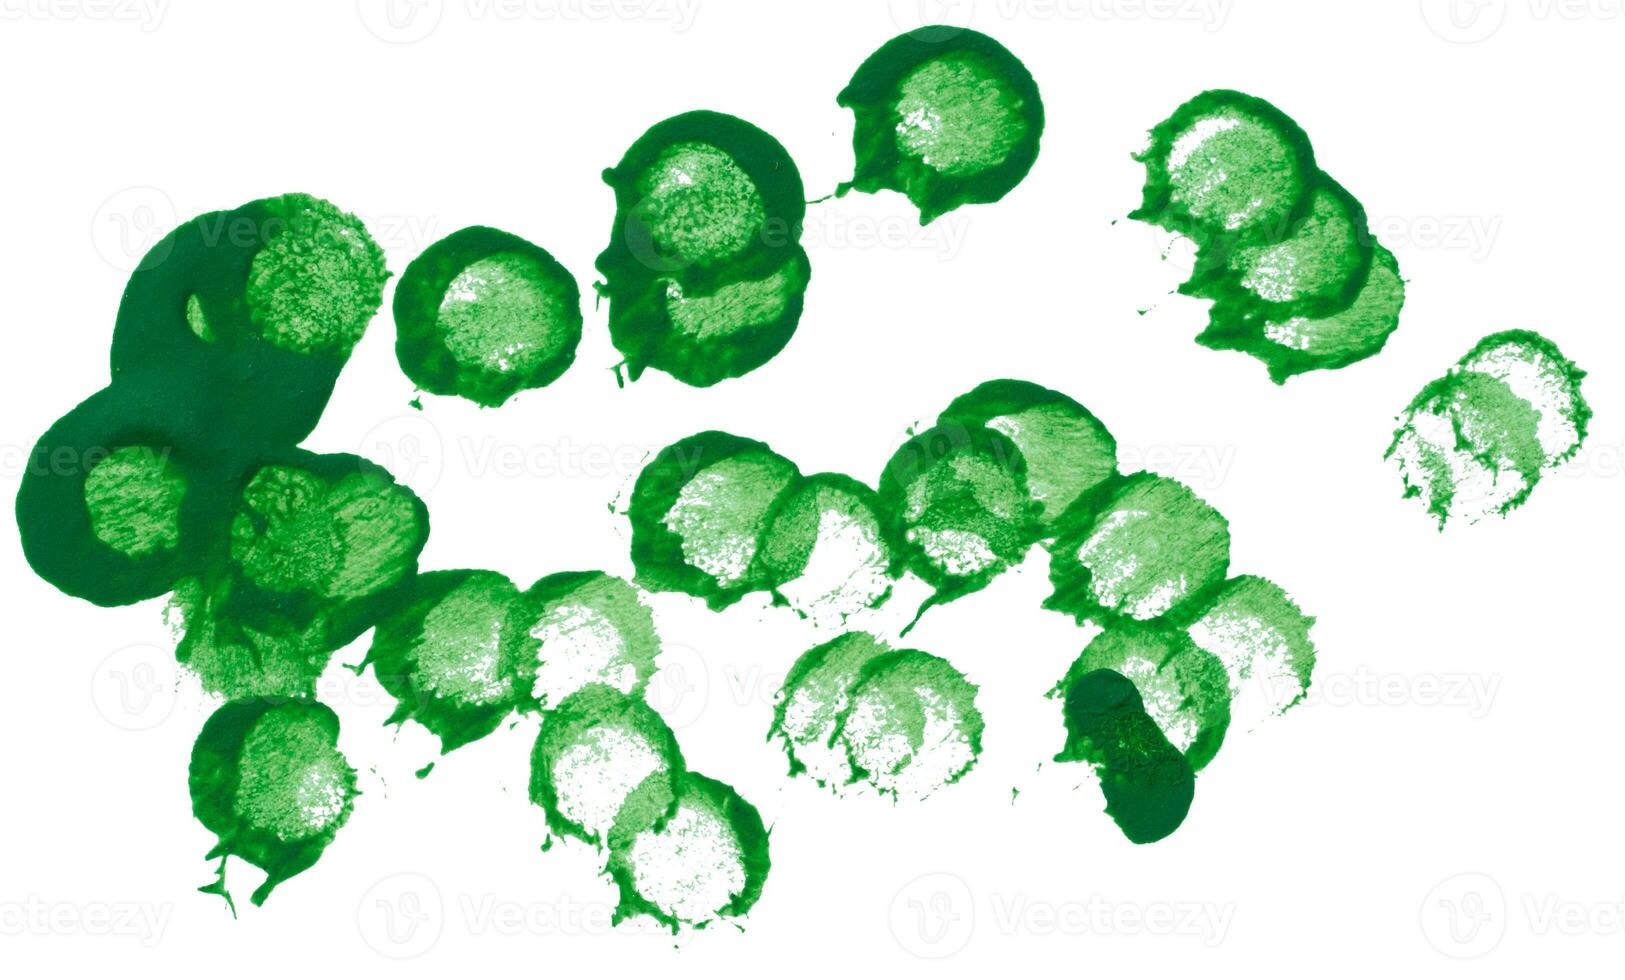 Drawn dots with acrylic green paint on a white isolated background photo